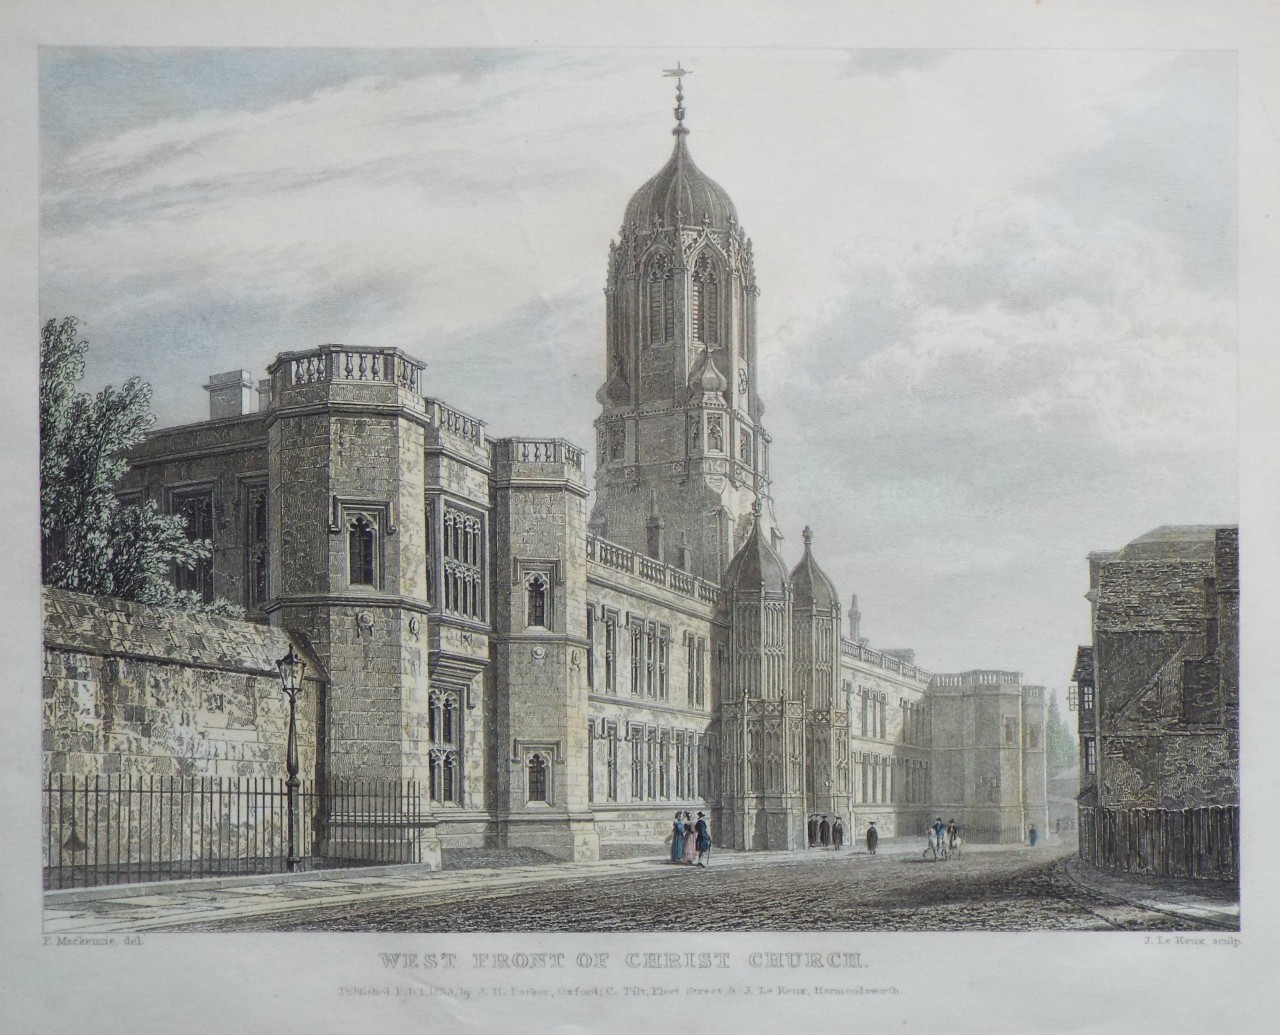 Print - West Front of Christ Church. - Le